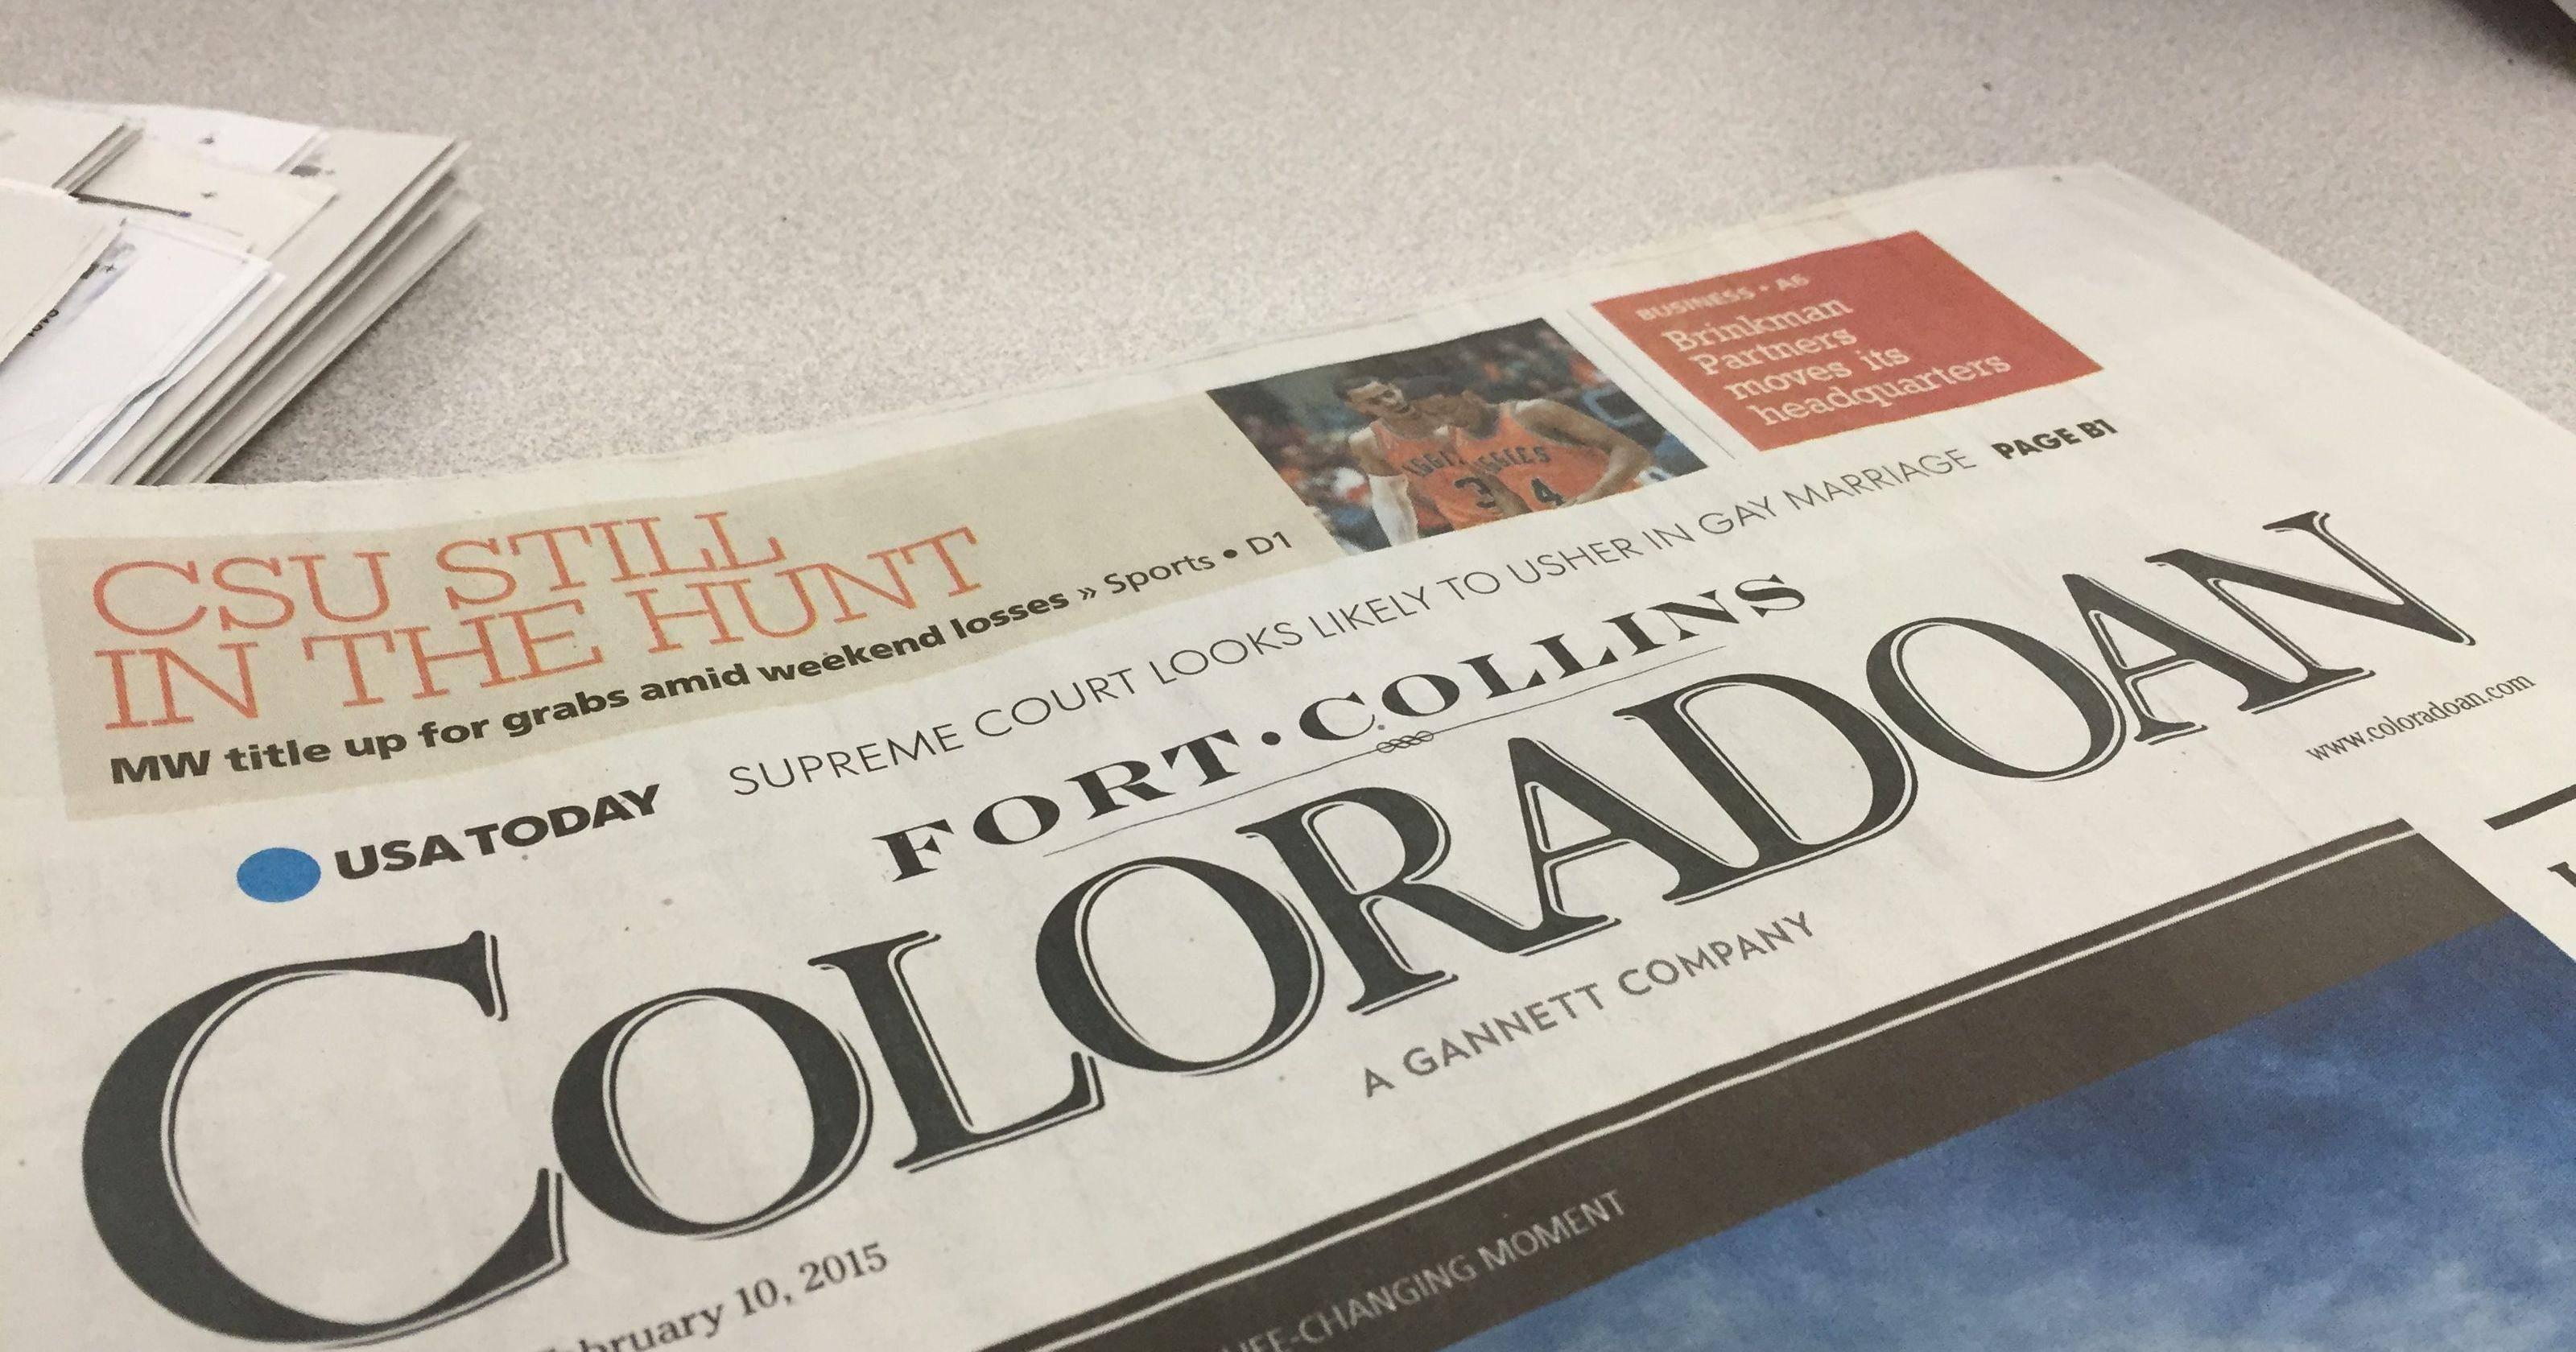 Fort Collins Coloradoan Sunday Only Delivery For 4 Weeks - SureShot Books Publishing LLC